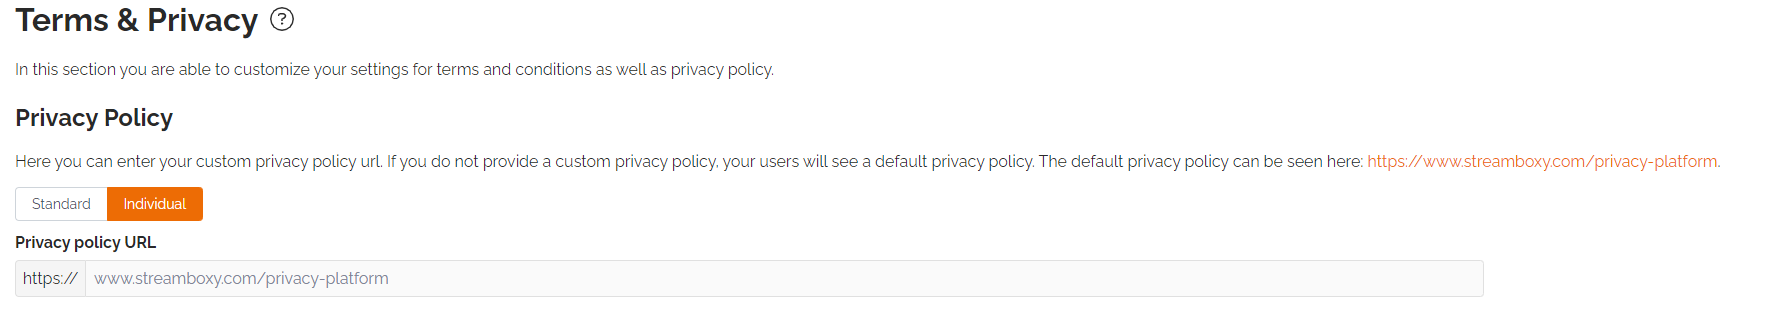 Individual Privacy Policy